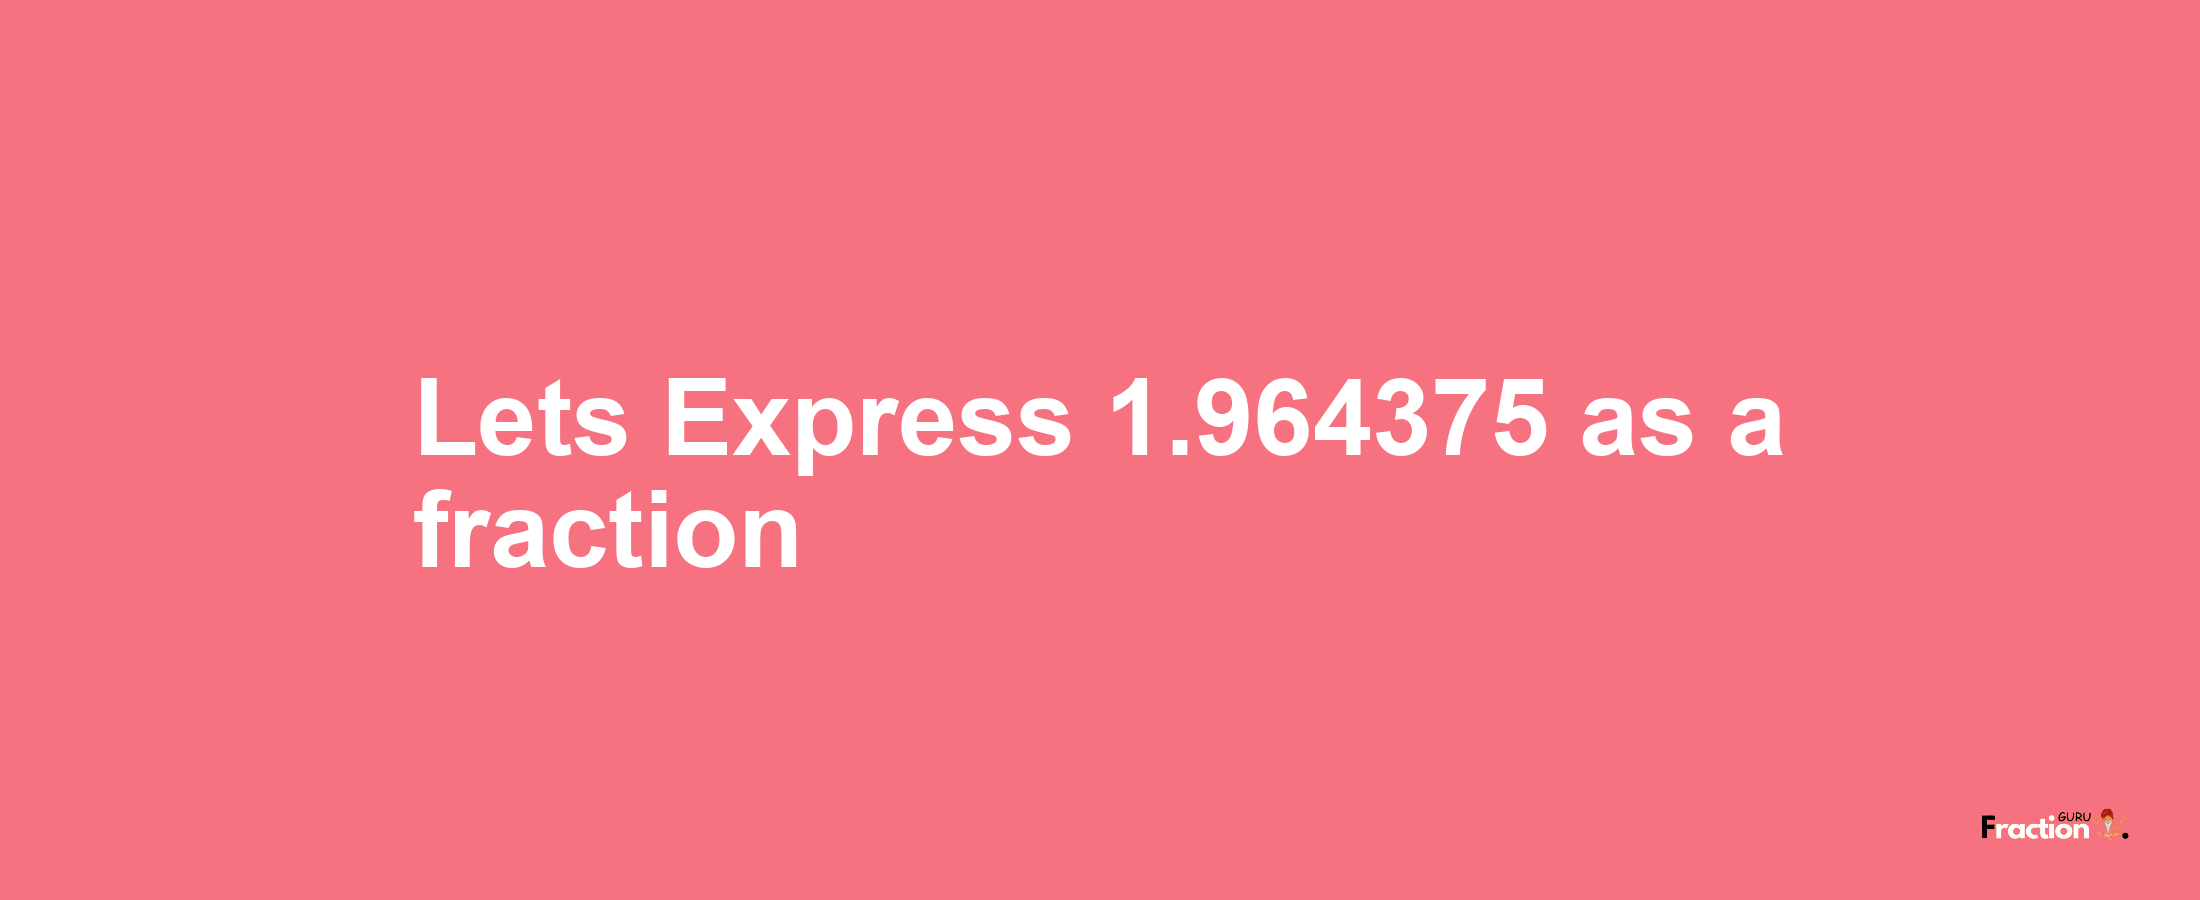 Lets Express 1.964375 as afraction